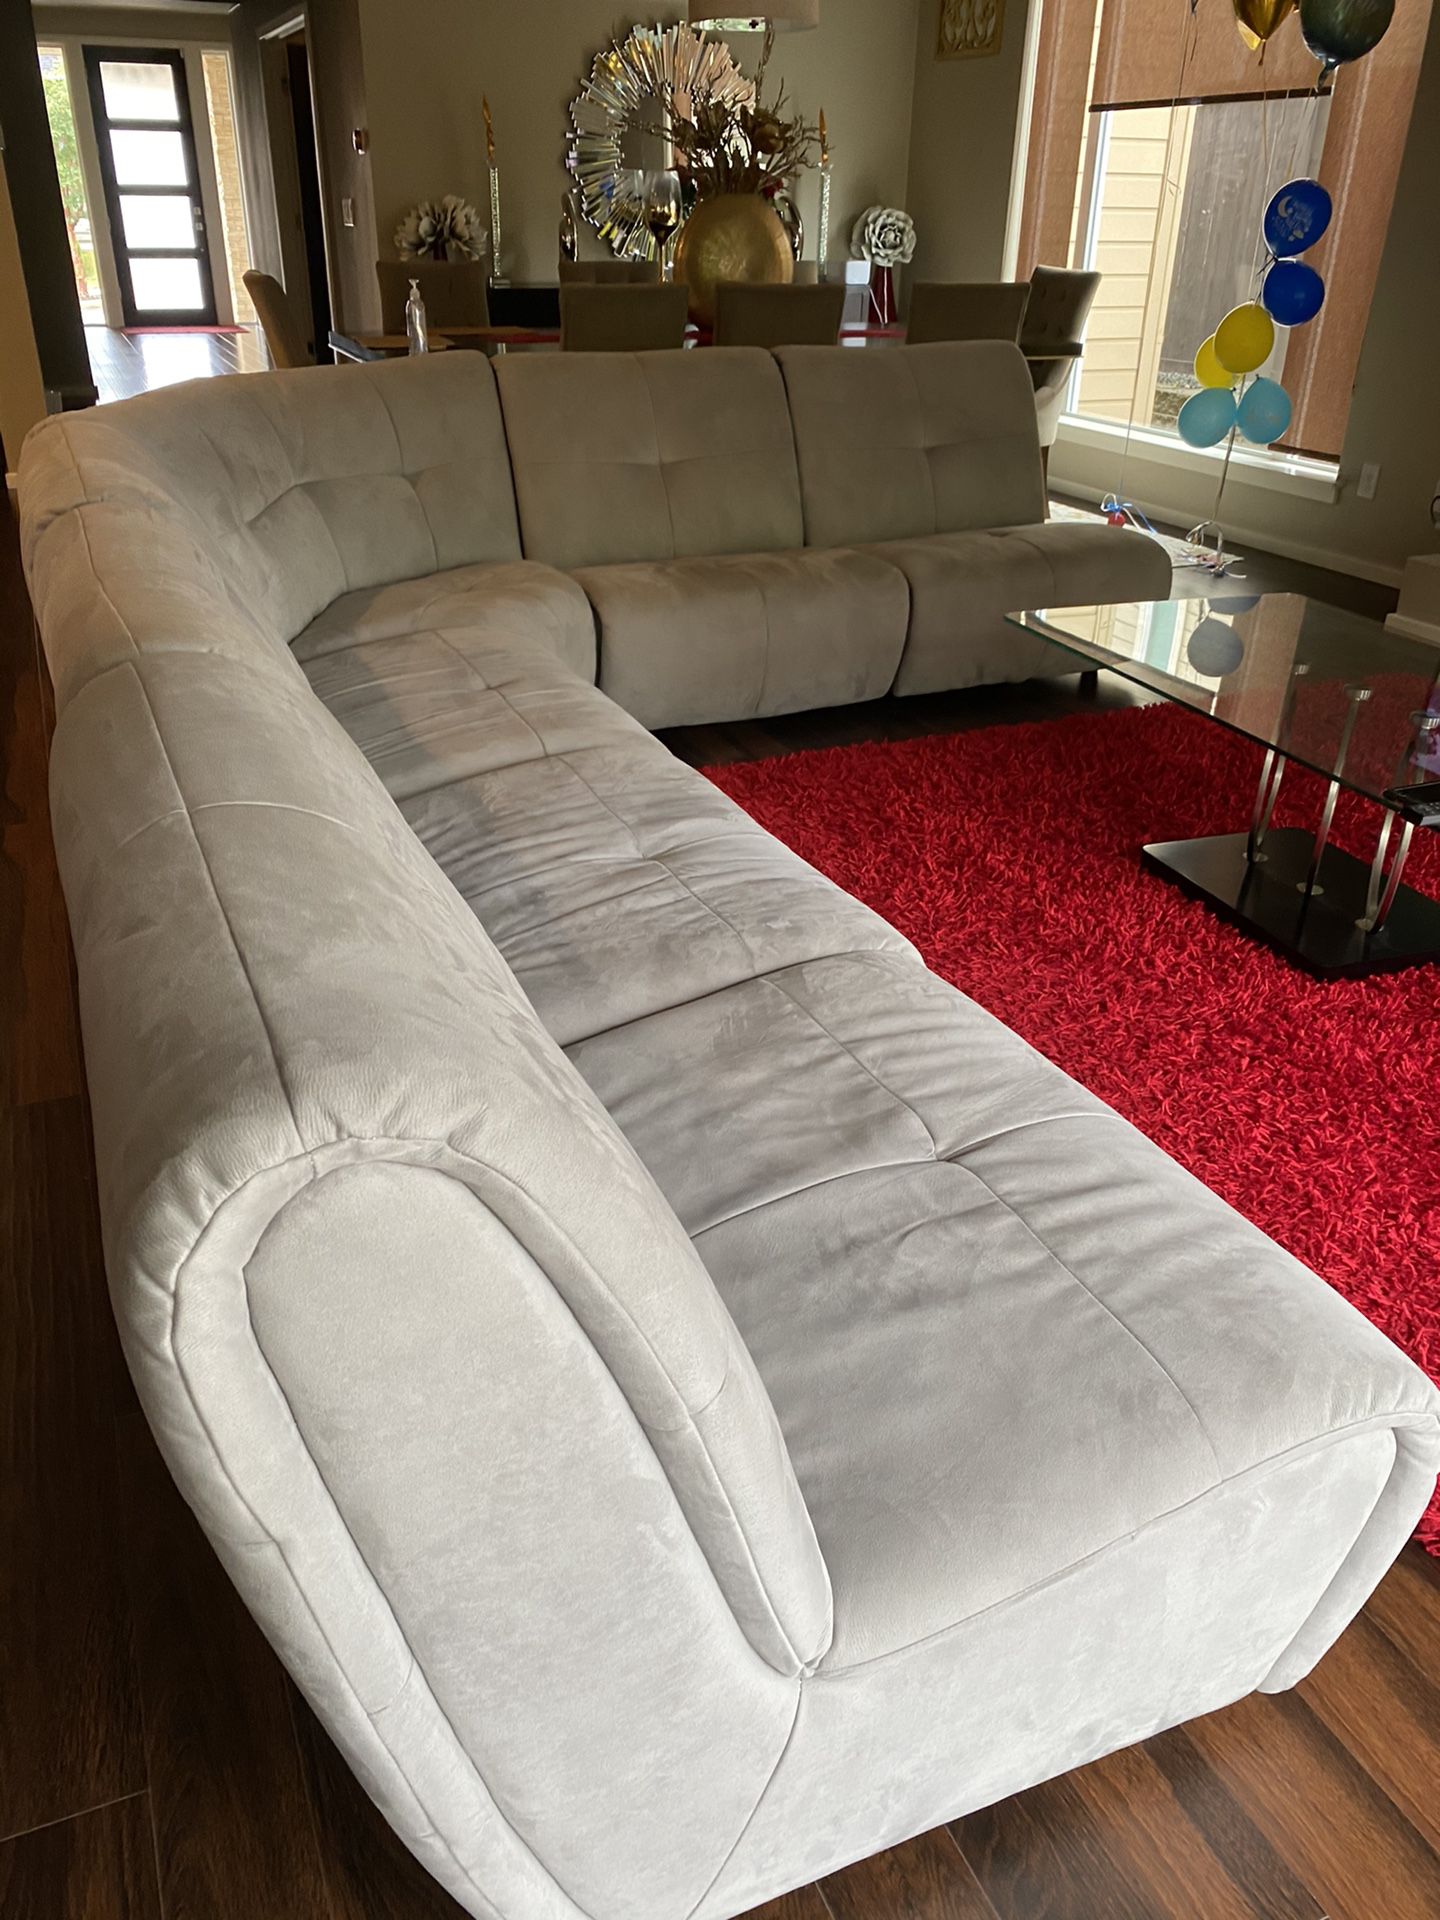 Like new used for staging sectional couch